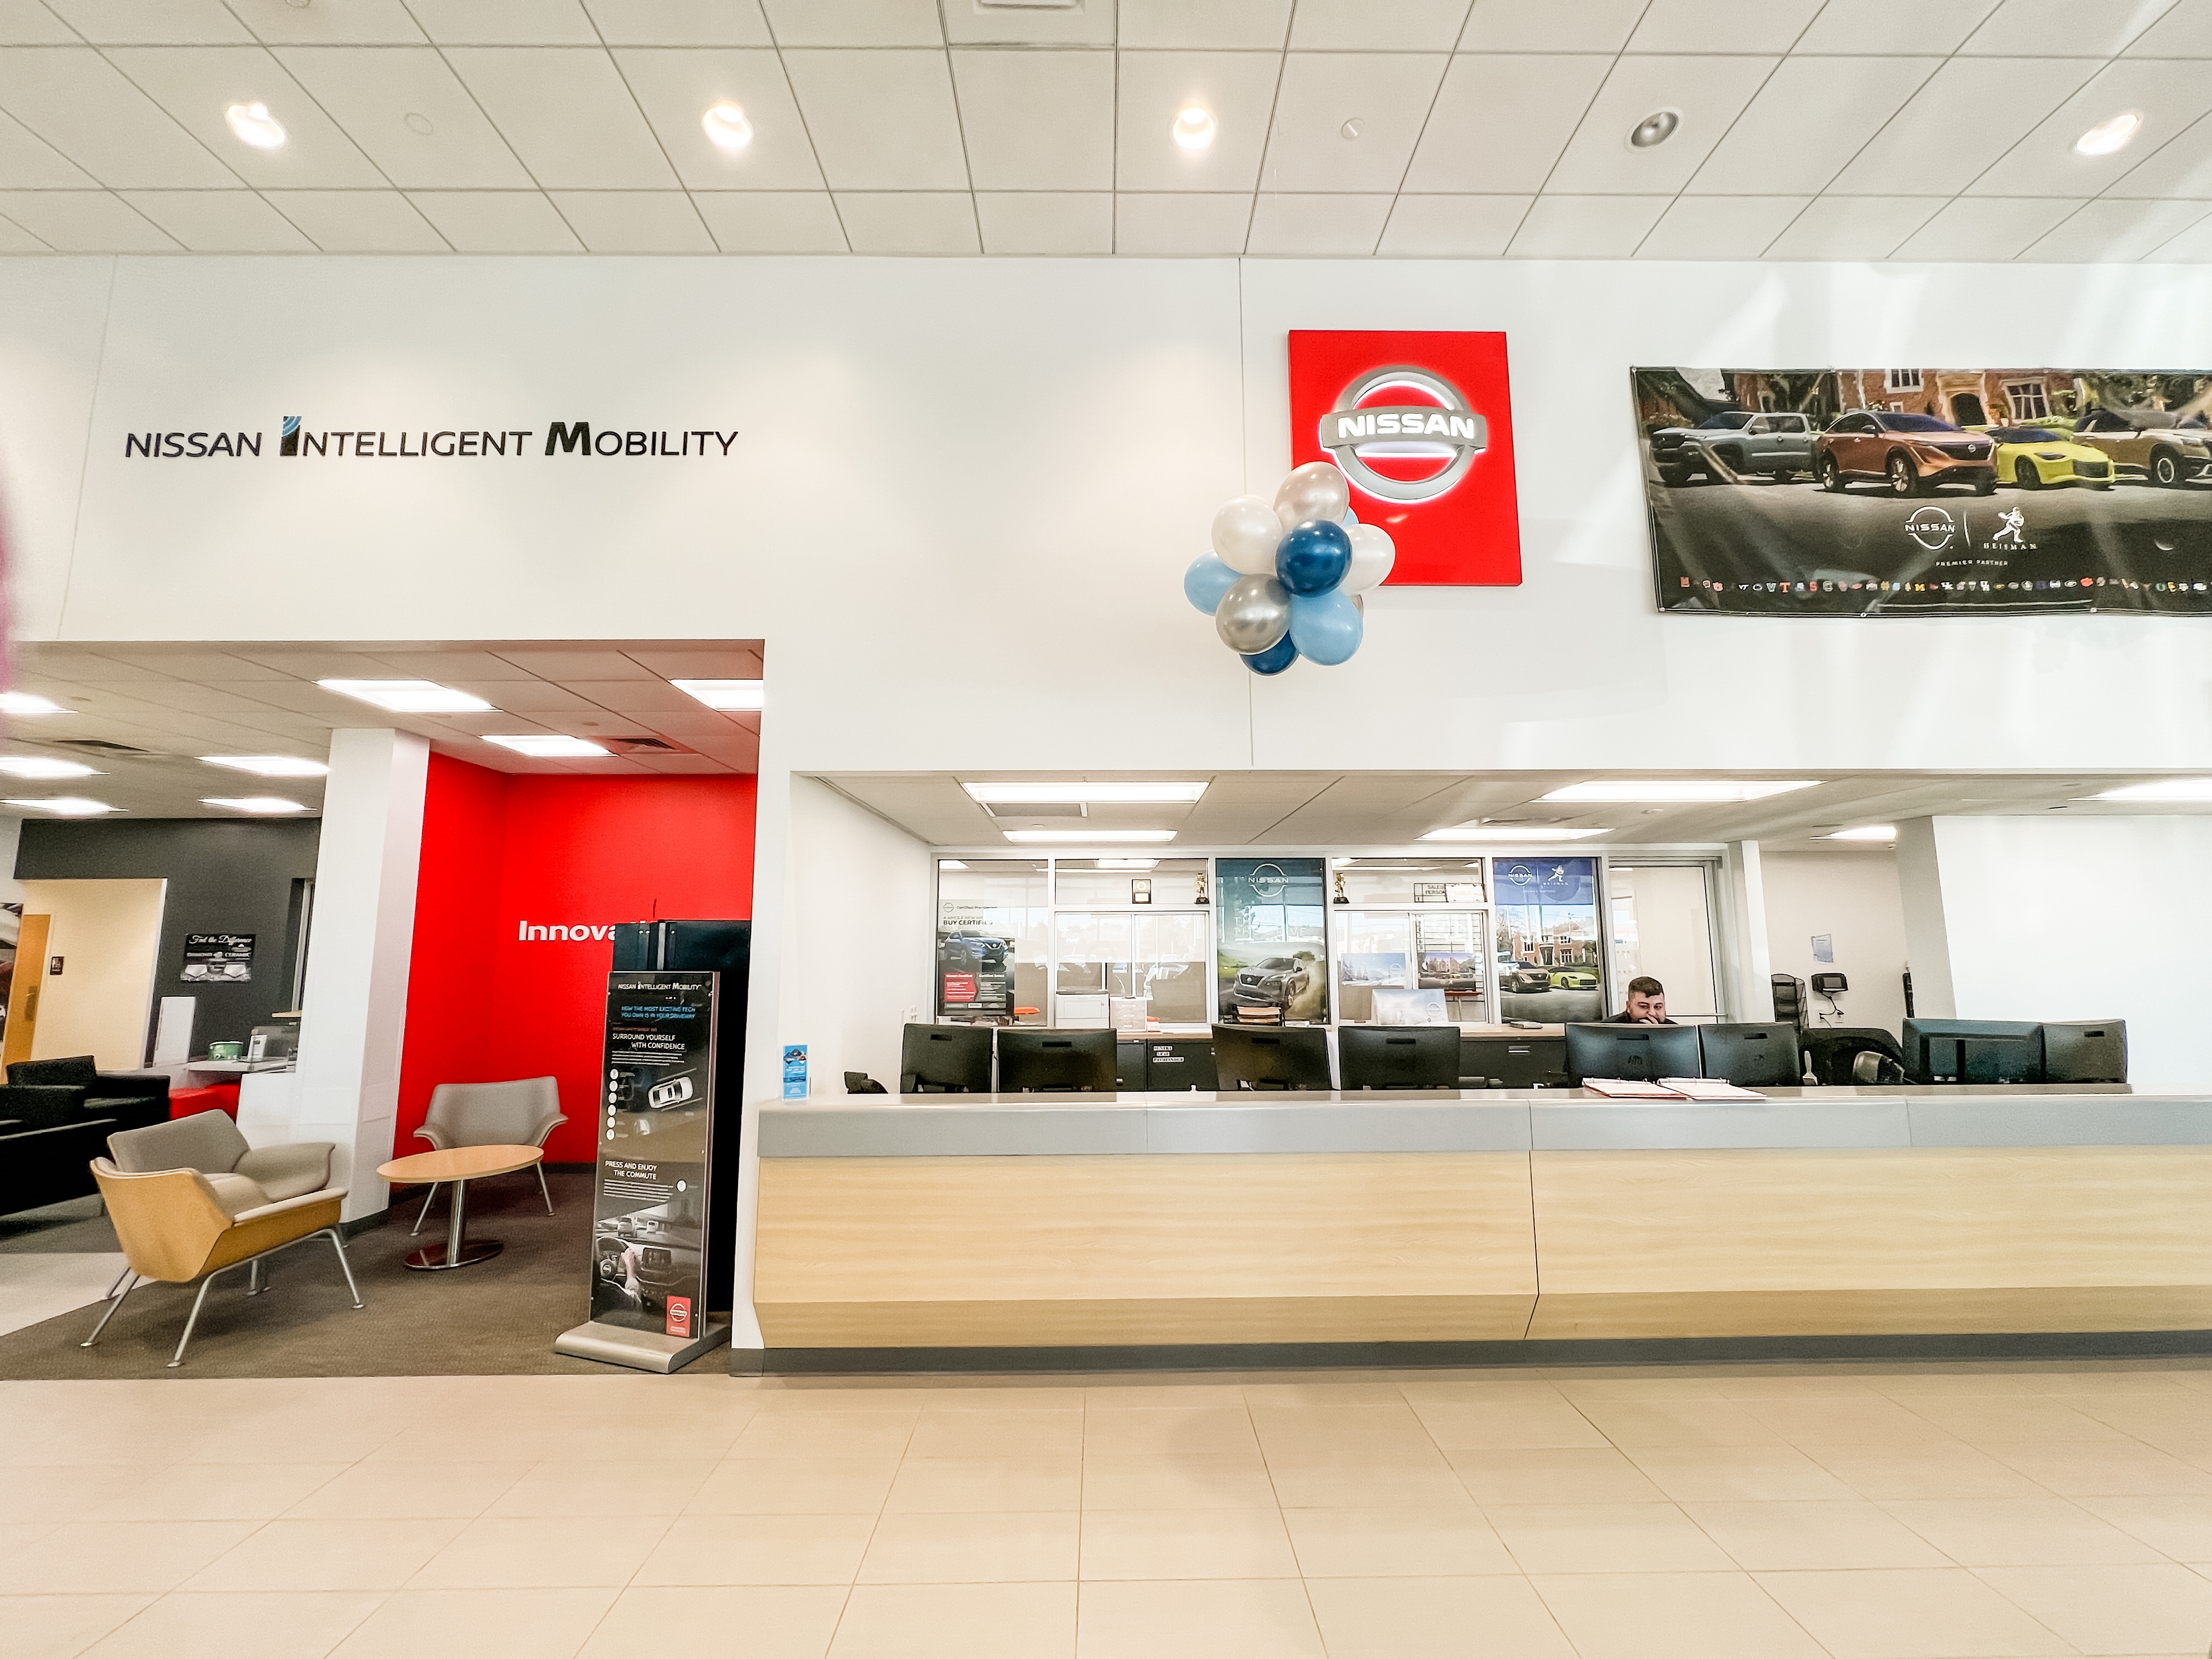 Nissan of Merrimack Valley Chelmsford MA